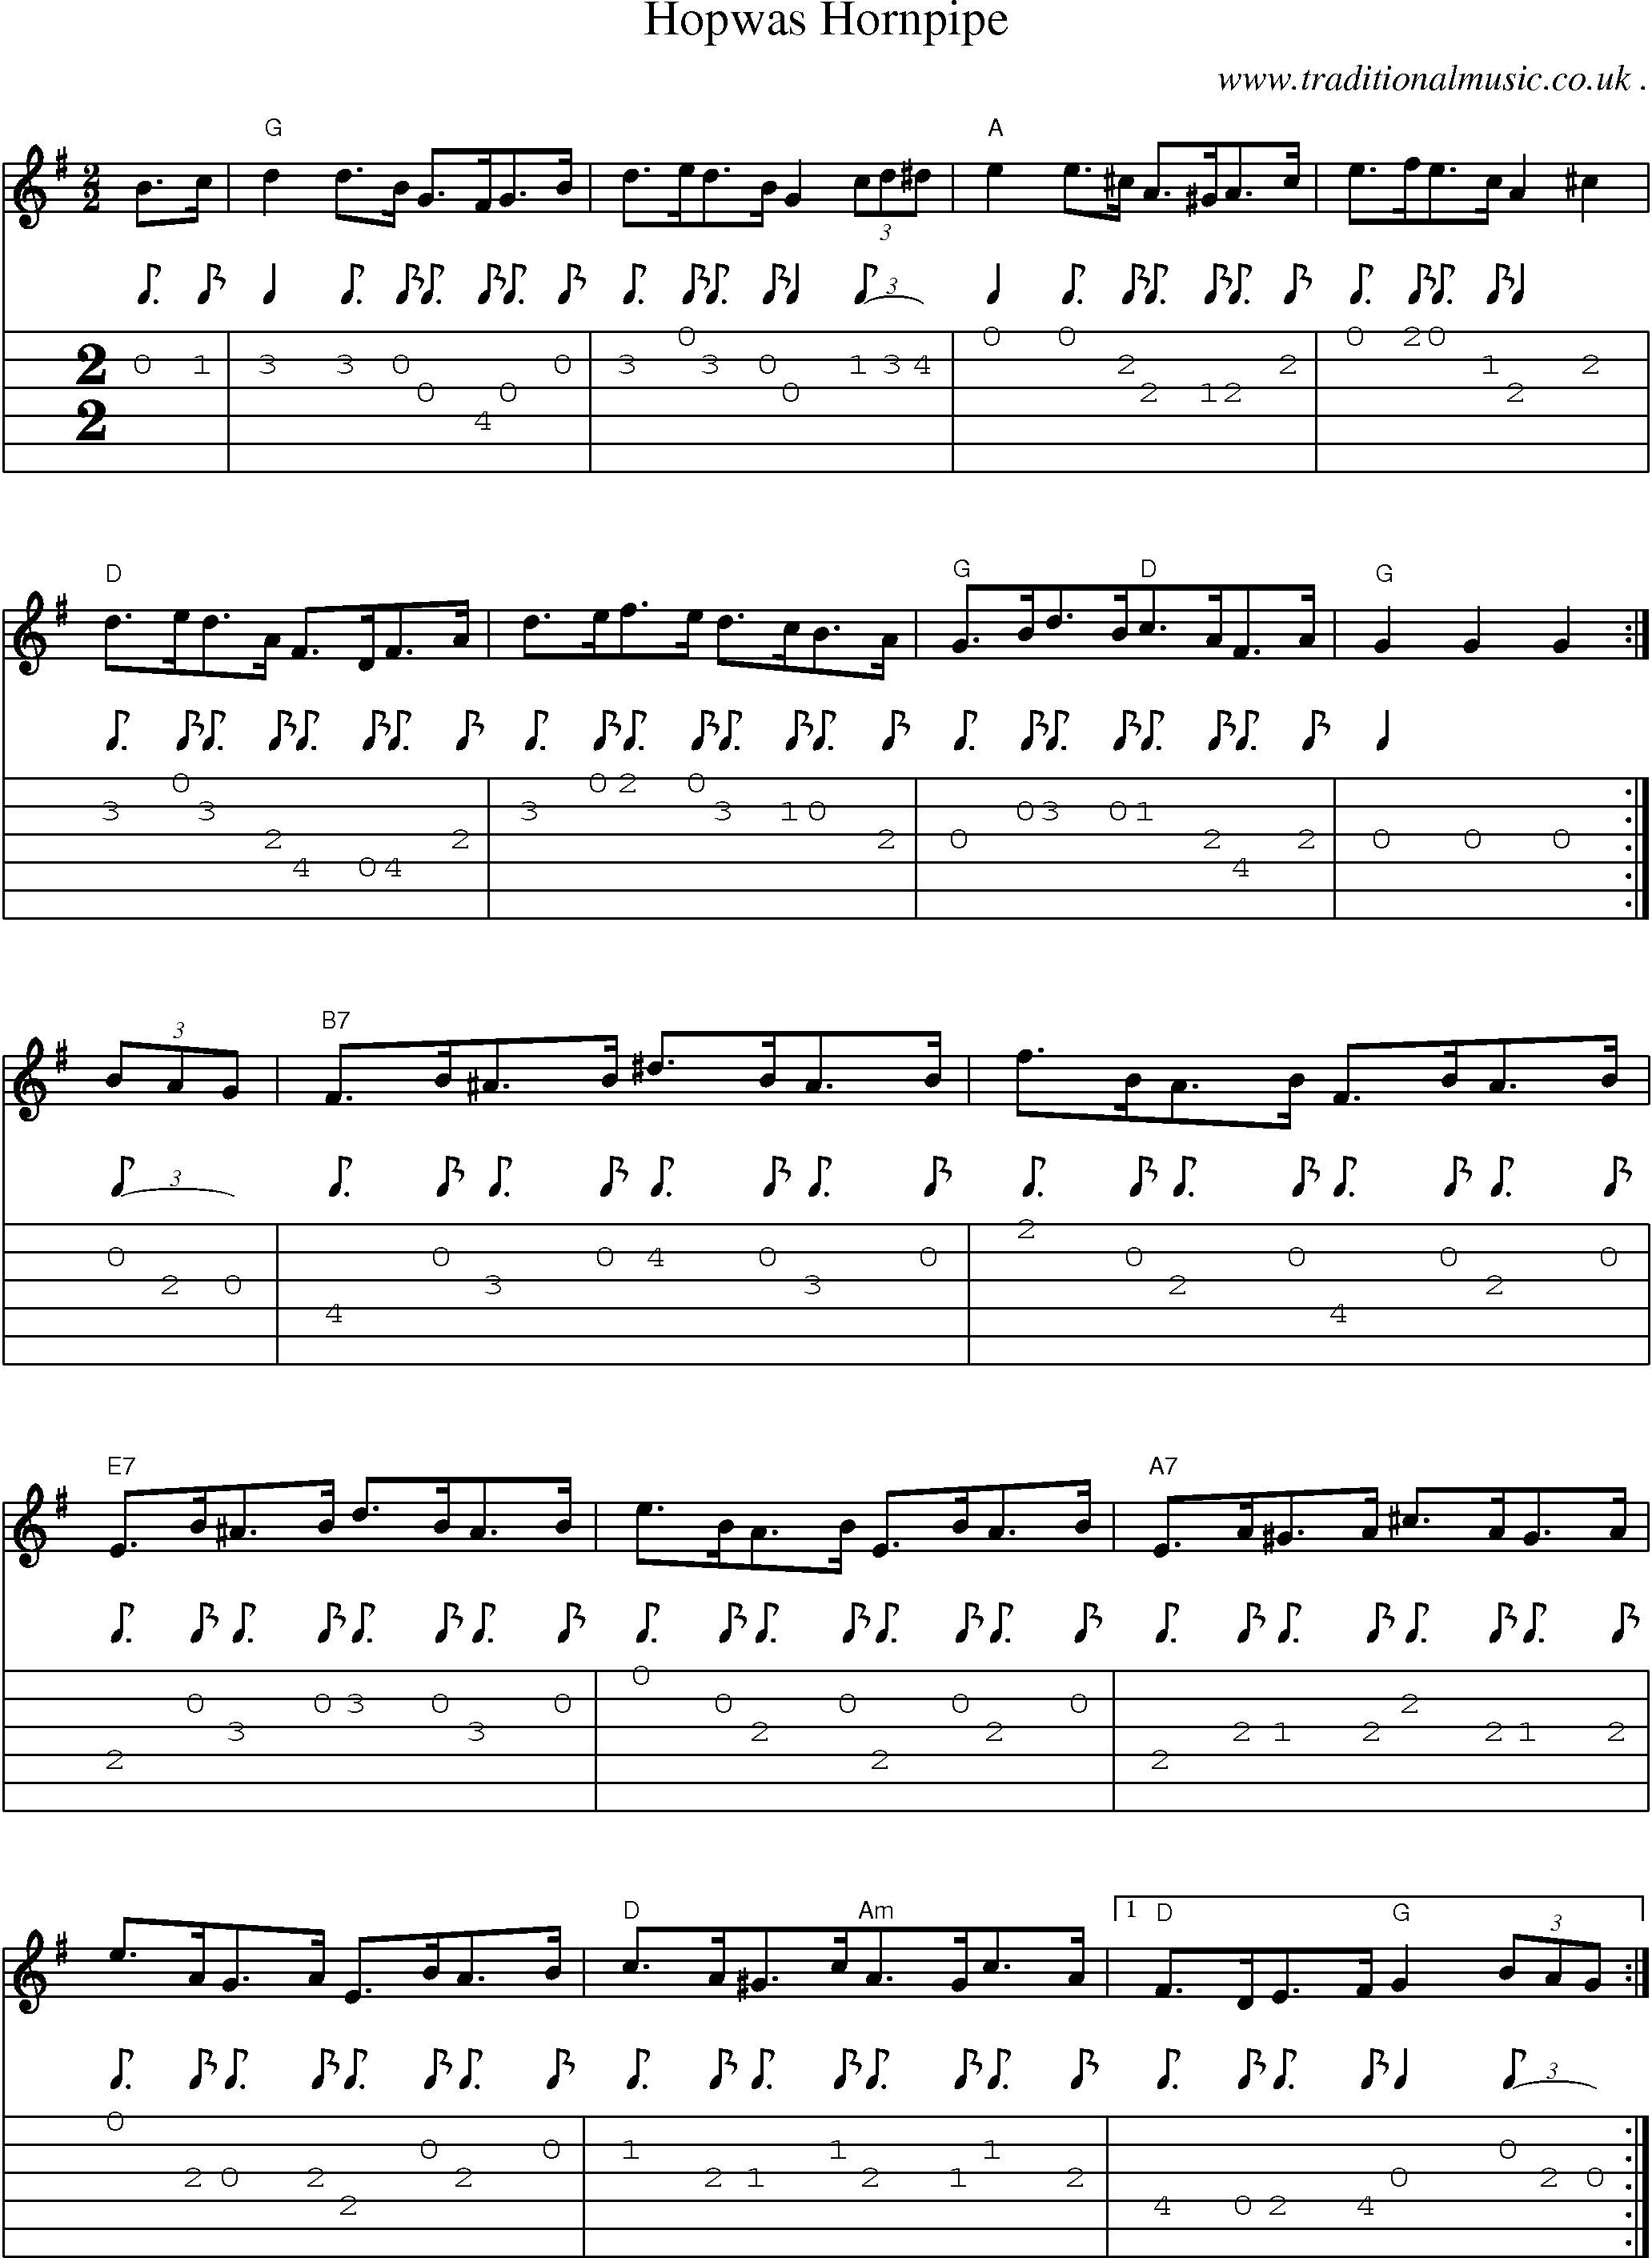 Sheet-Music and Guitar Tabs for Hopwas Hornpipe